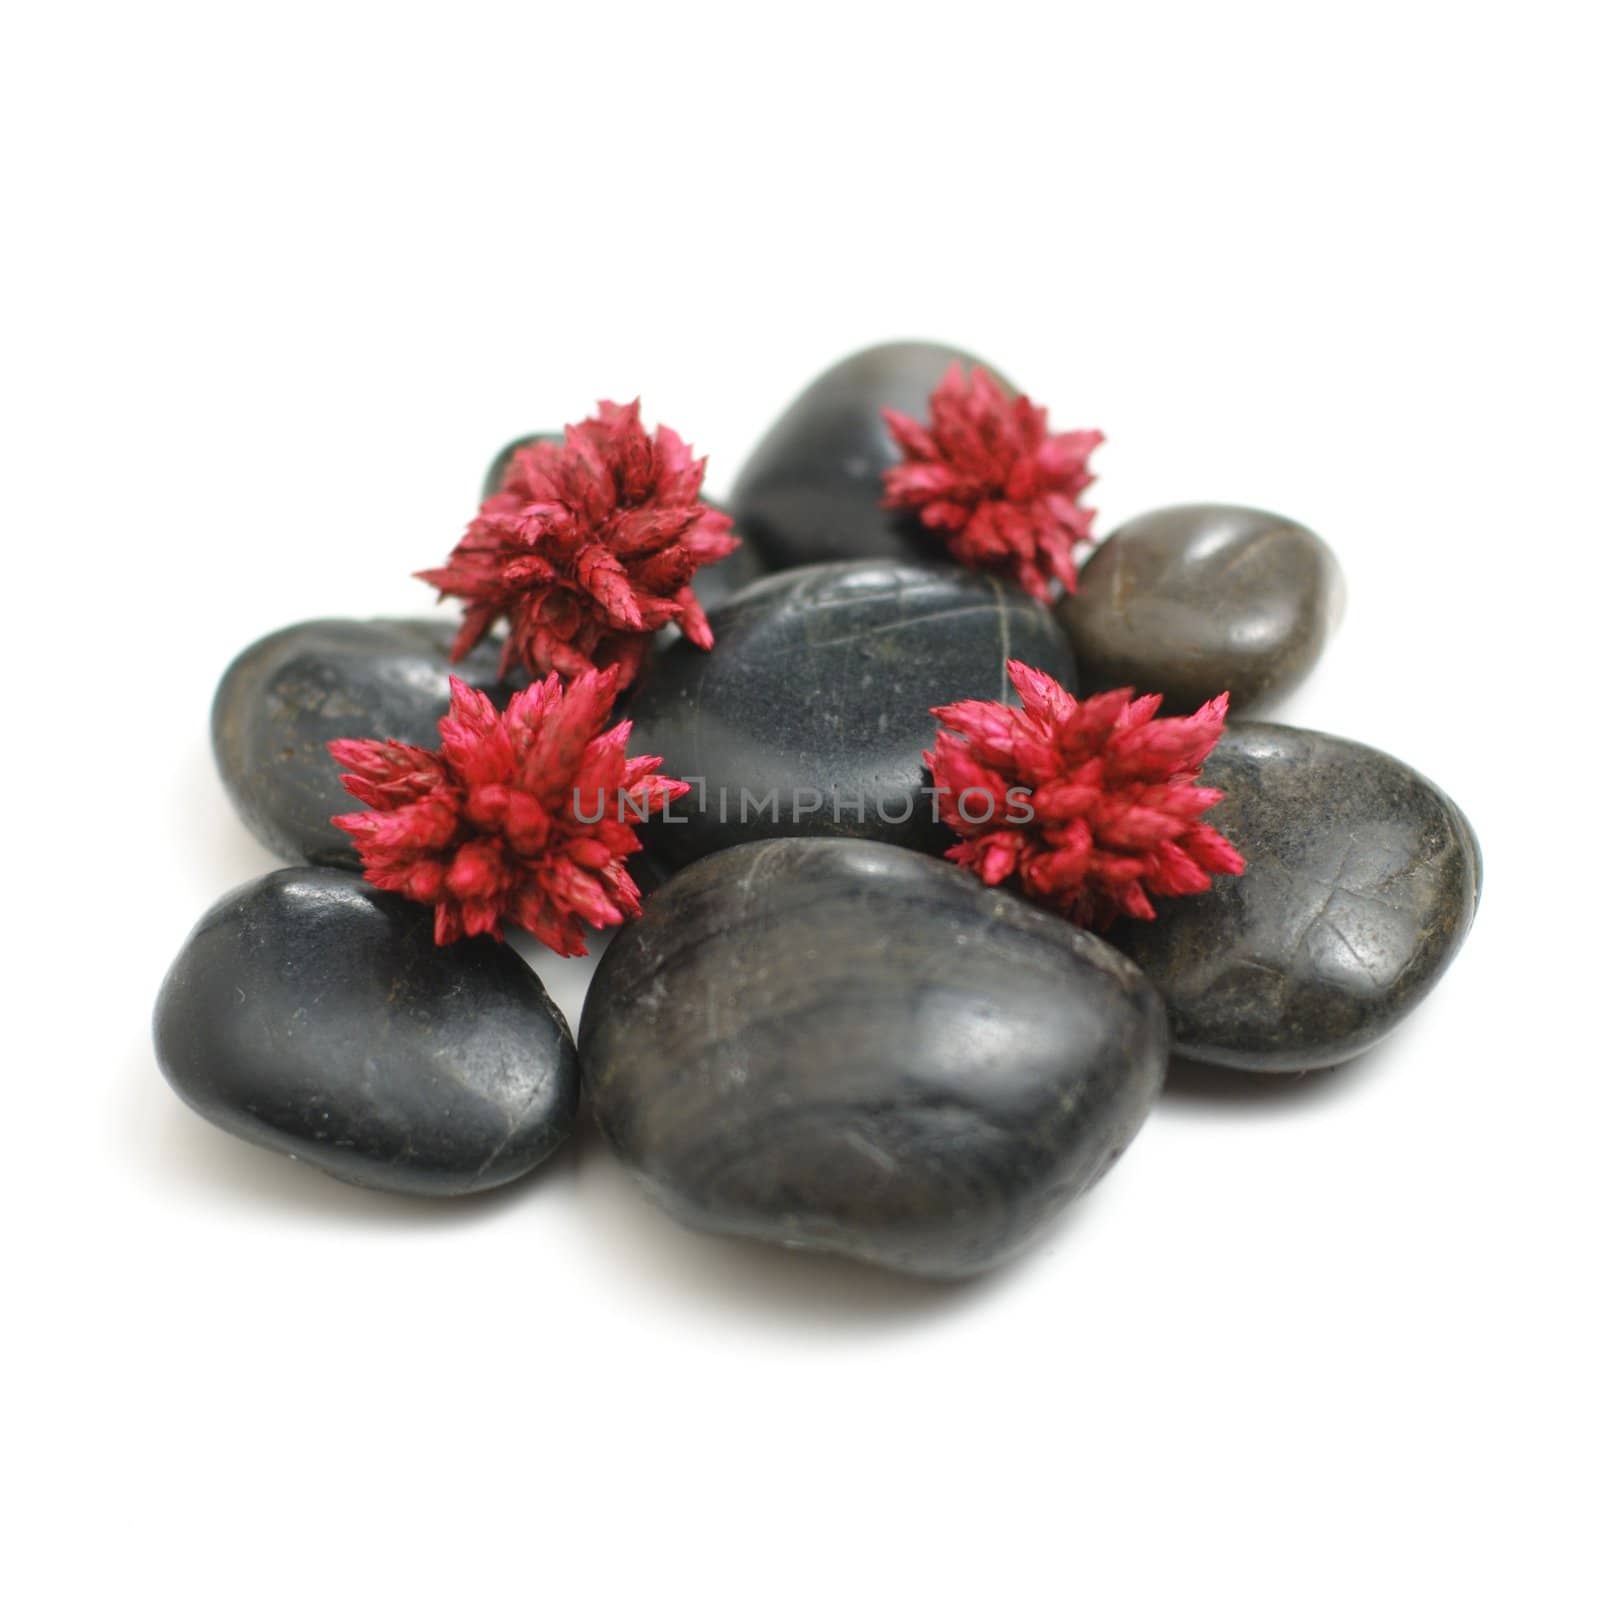 Floral rock display on a white background.